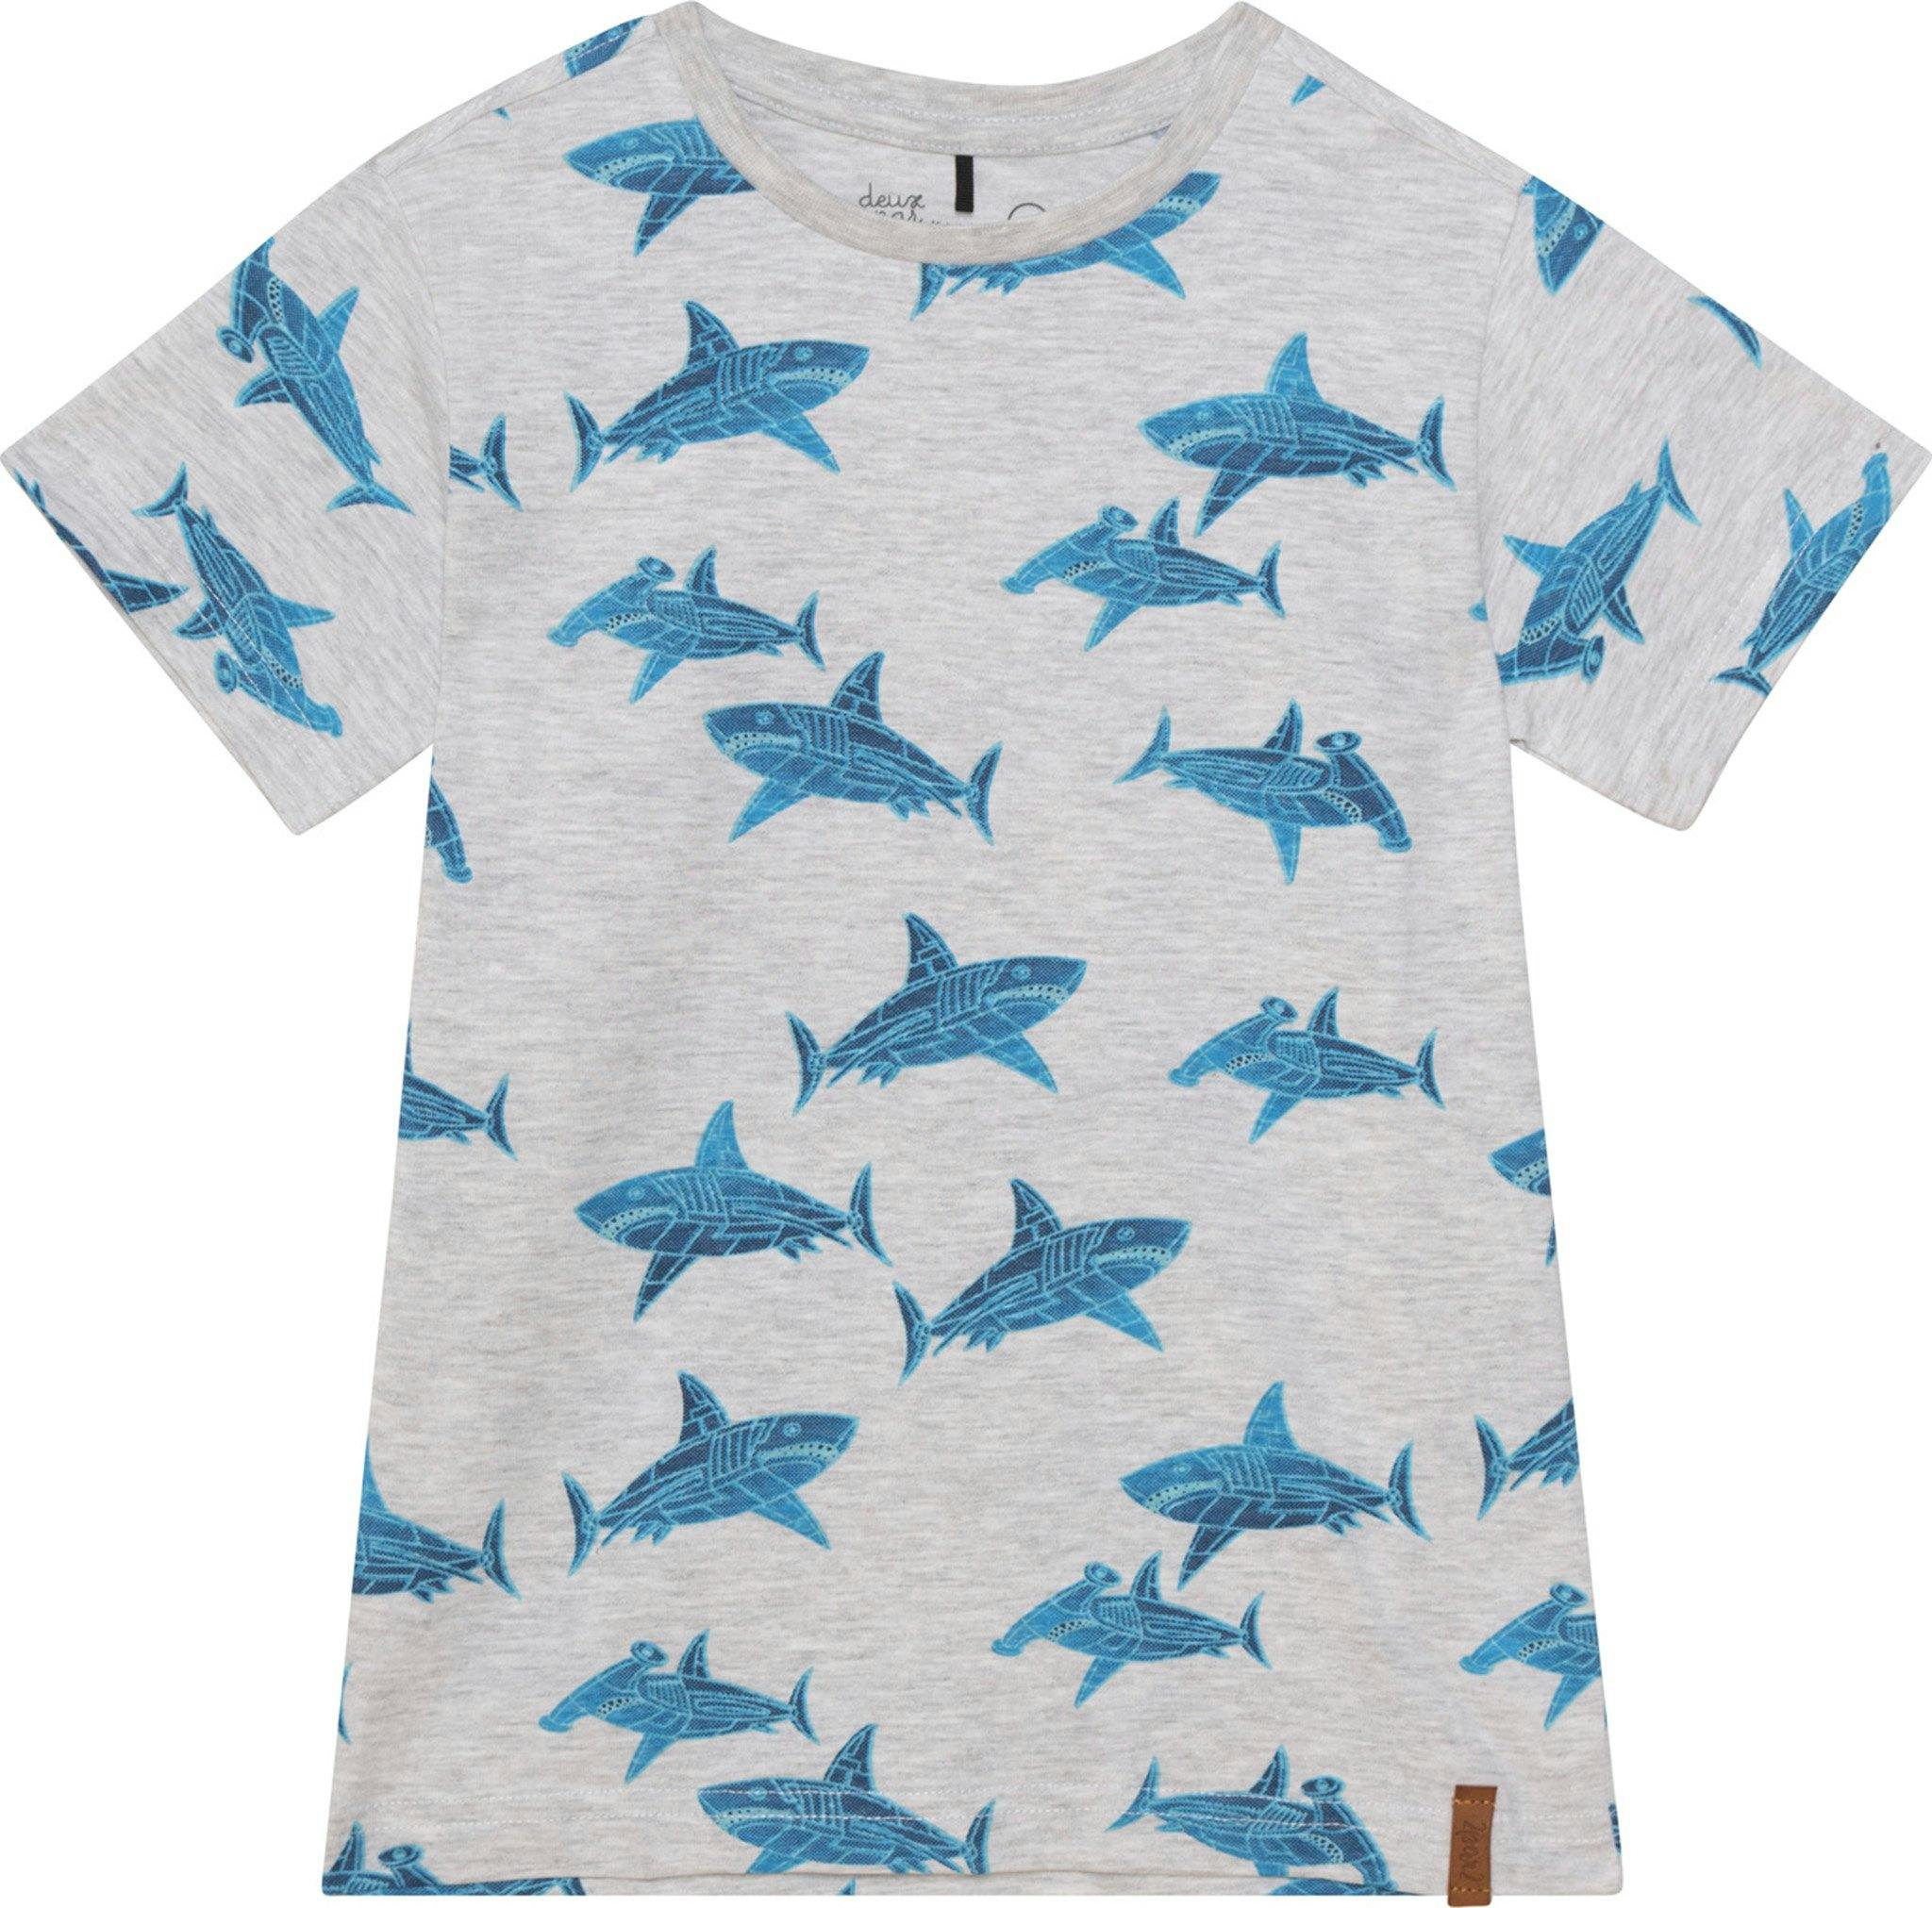 Product image for Printed Cotton Jersey Tee - Big Boys